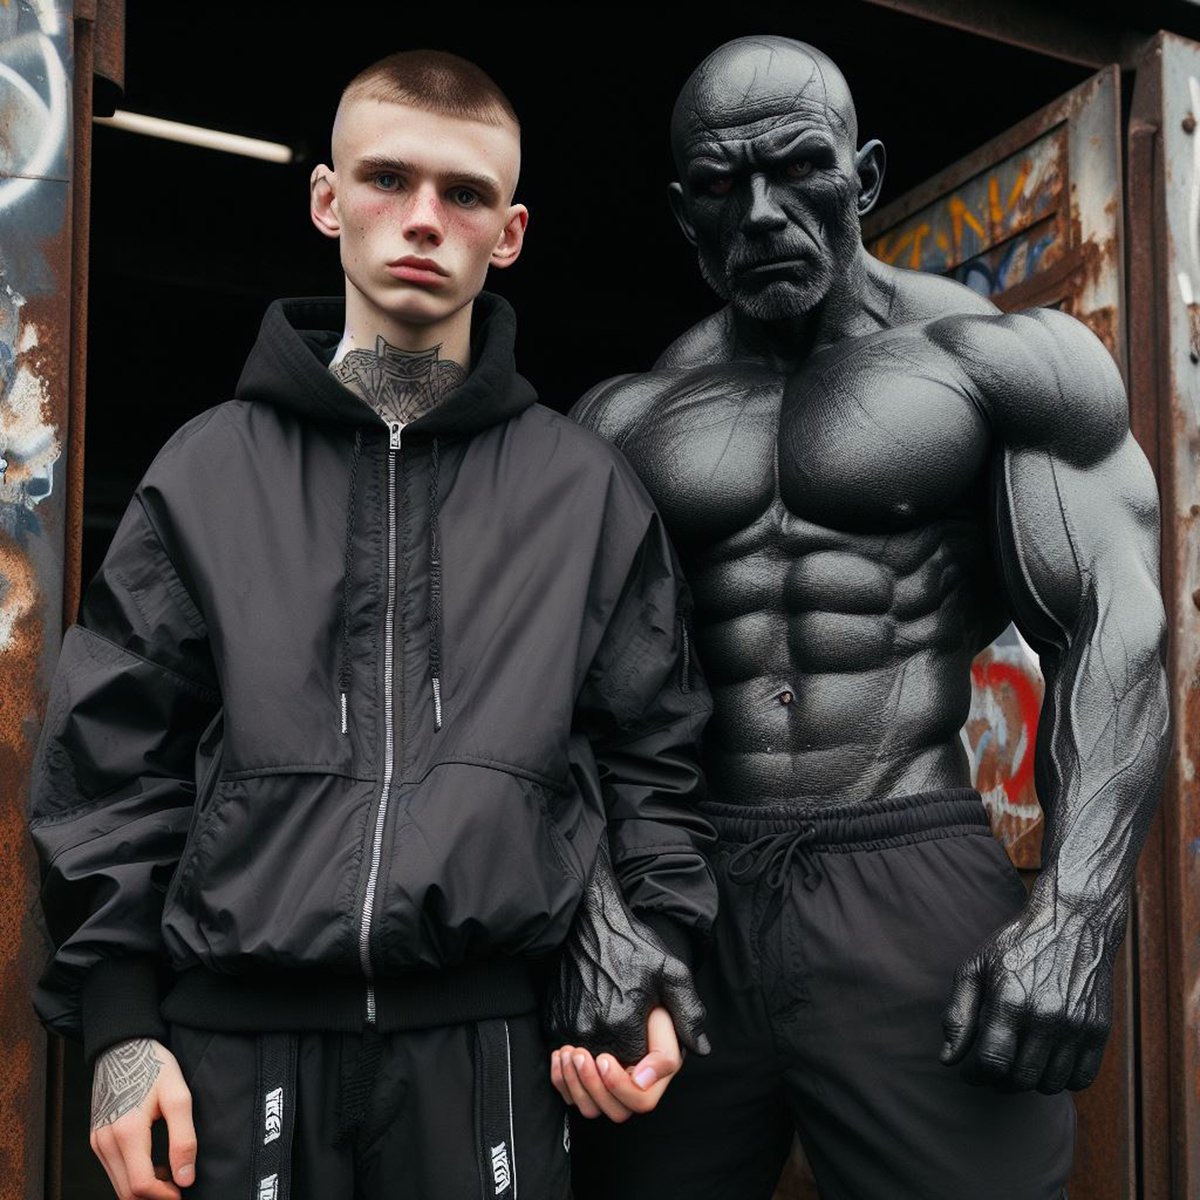 Out with the Cyborg Dad.

@cyberhoodboy #cyborg #cyborgs #robot #robots #androids #tracksuits #tracksuitfetish #scally #gayscally